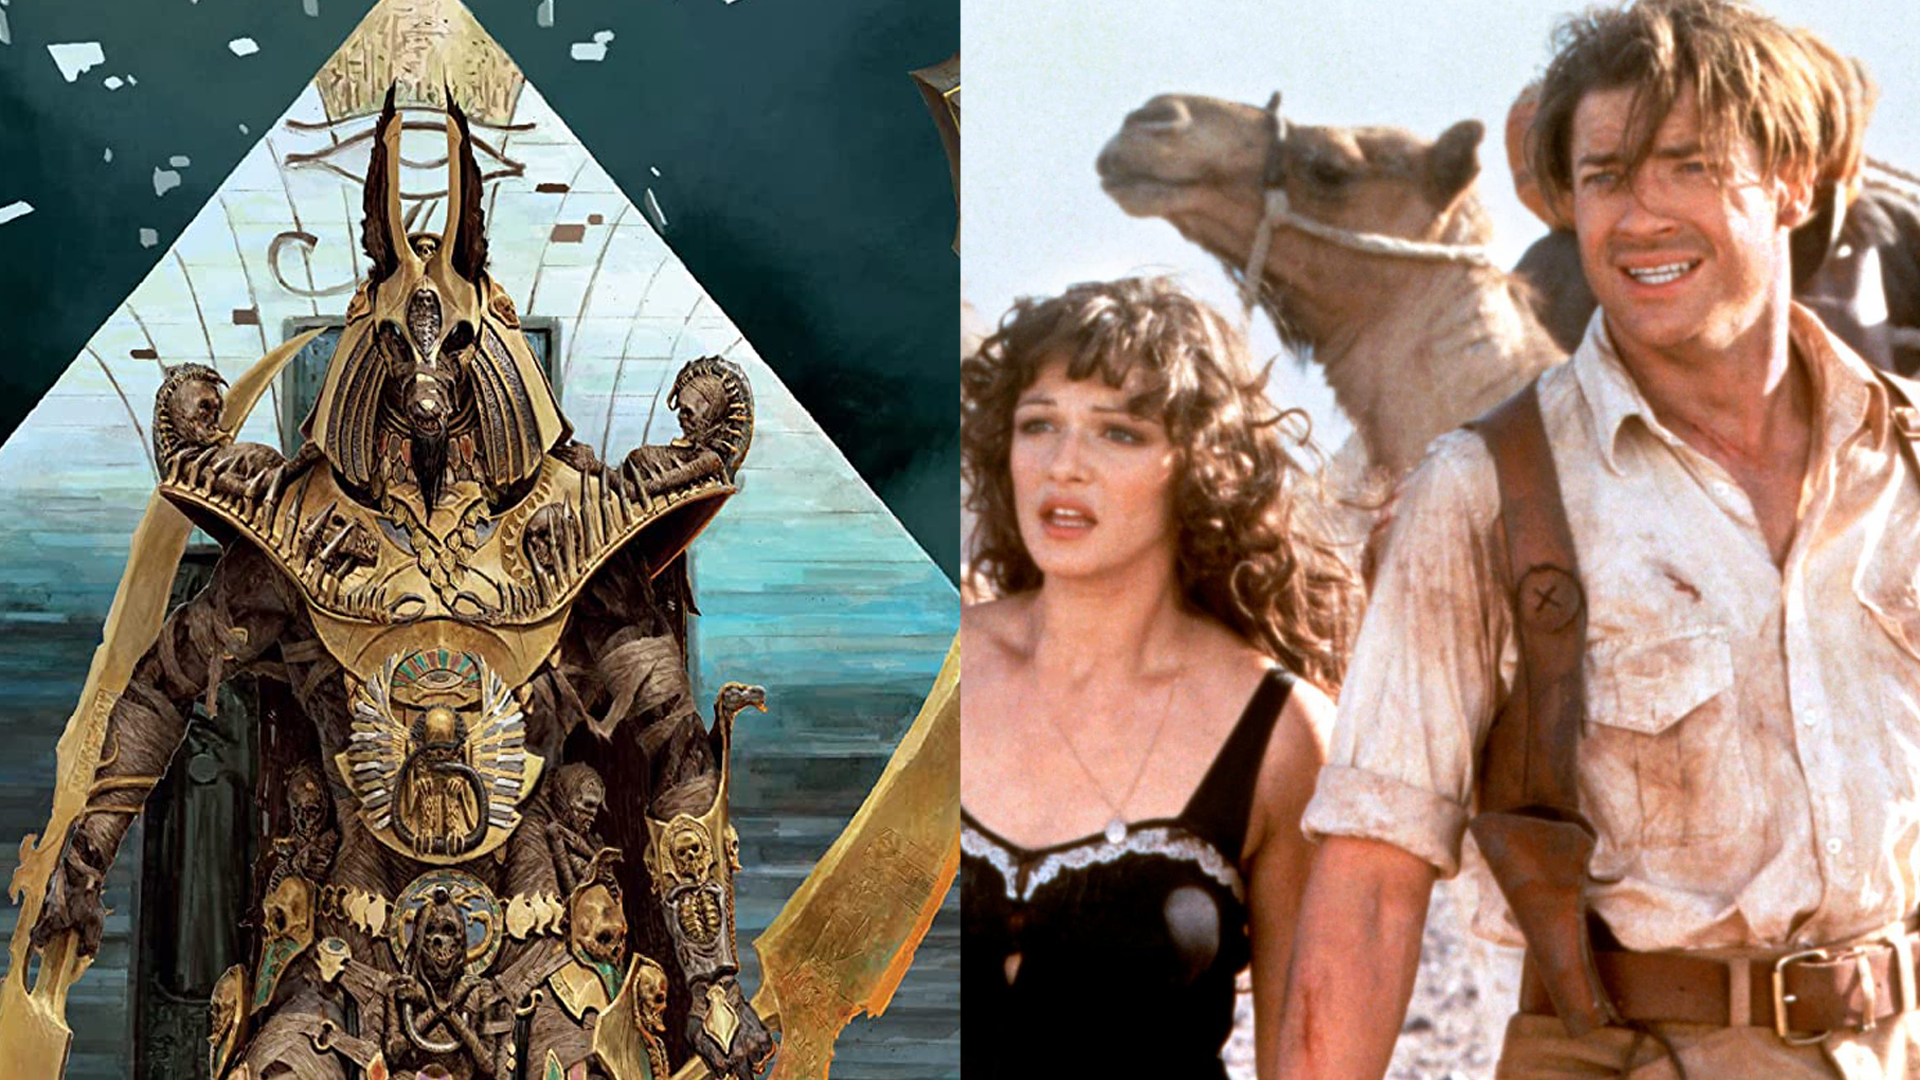 A screenshot from The Mummy (1999) and an image of the front cover of Ankh: Gods of Egypt.